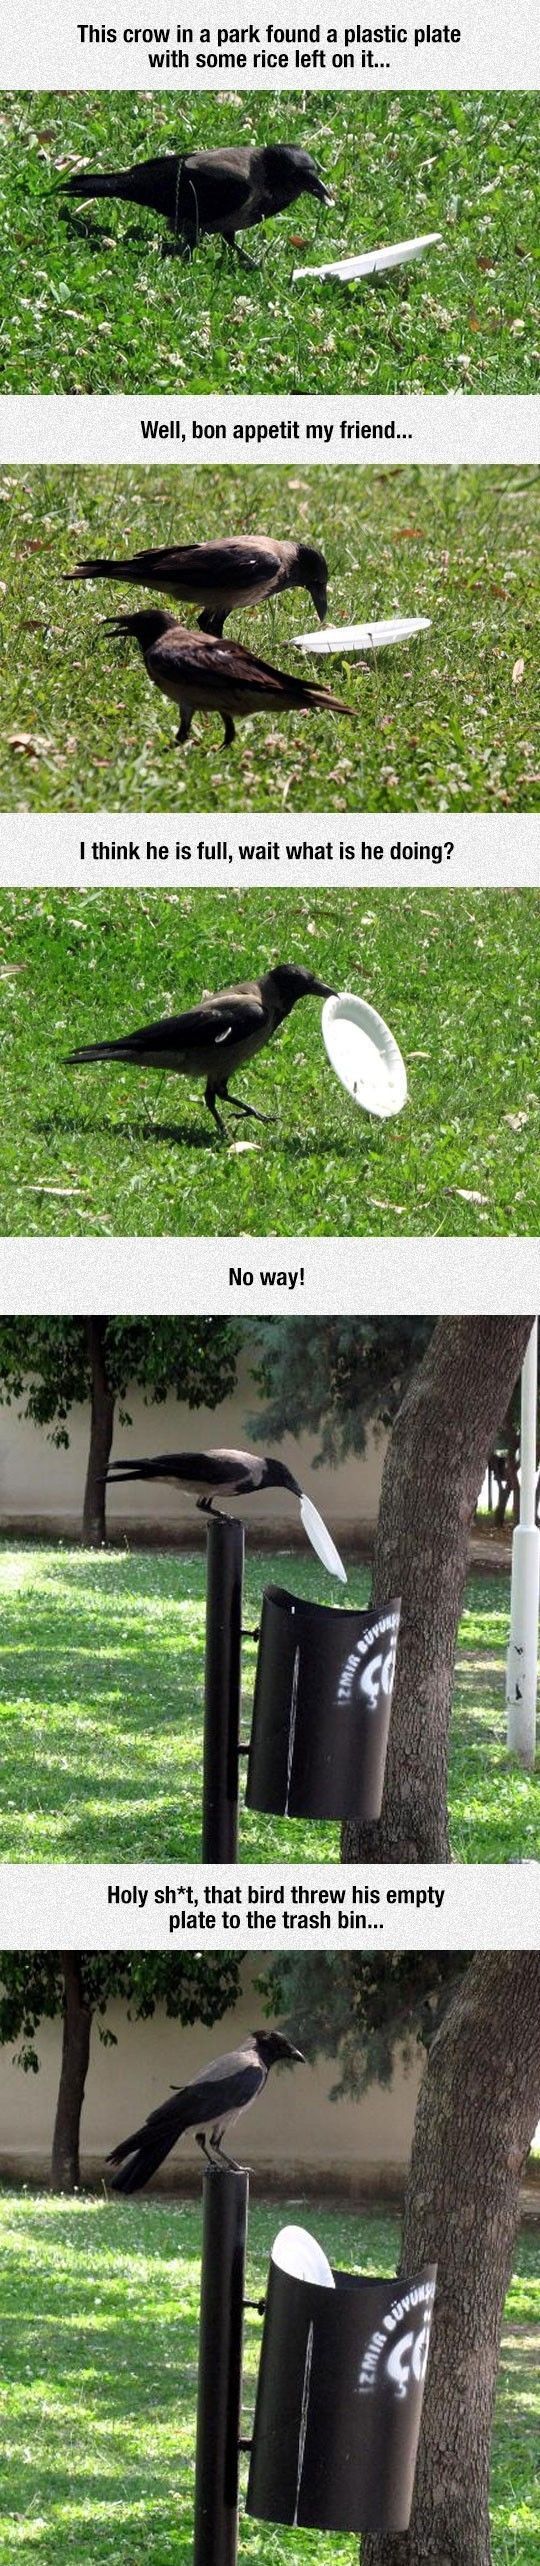 This Crow Is Better Than Most People